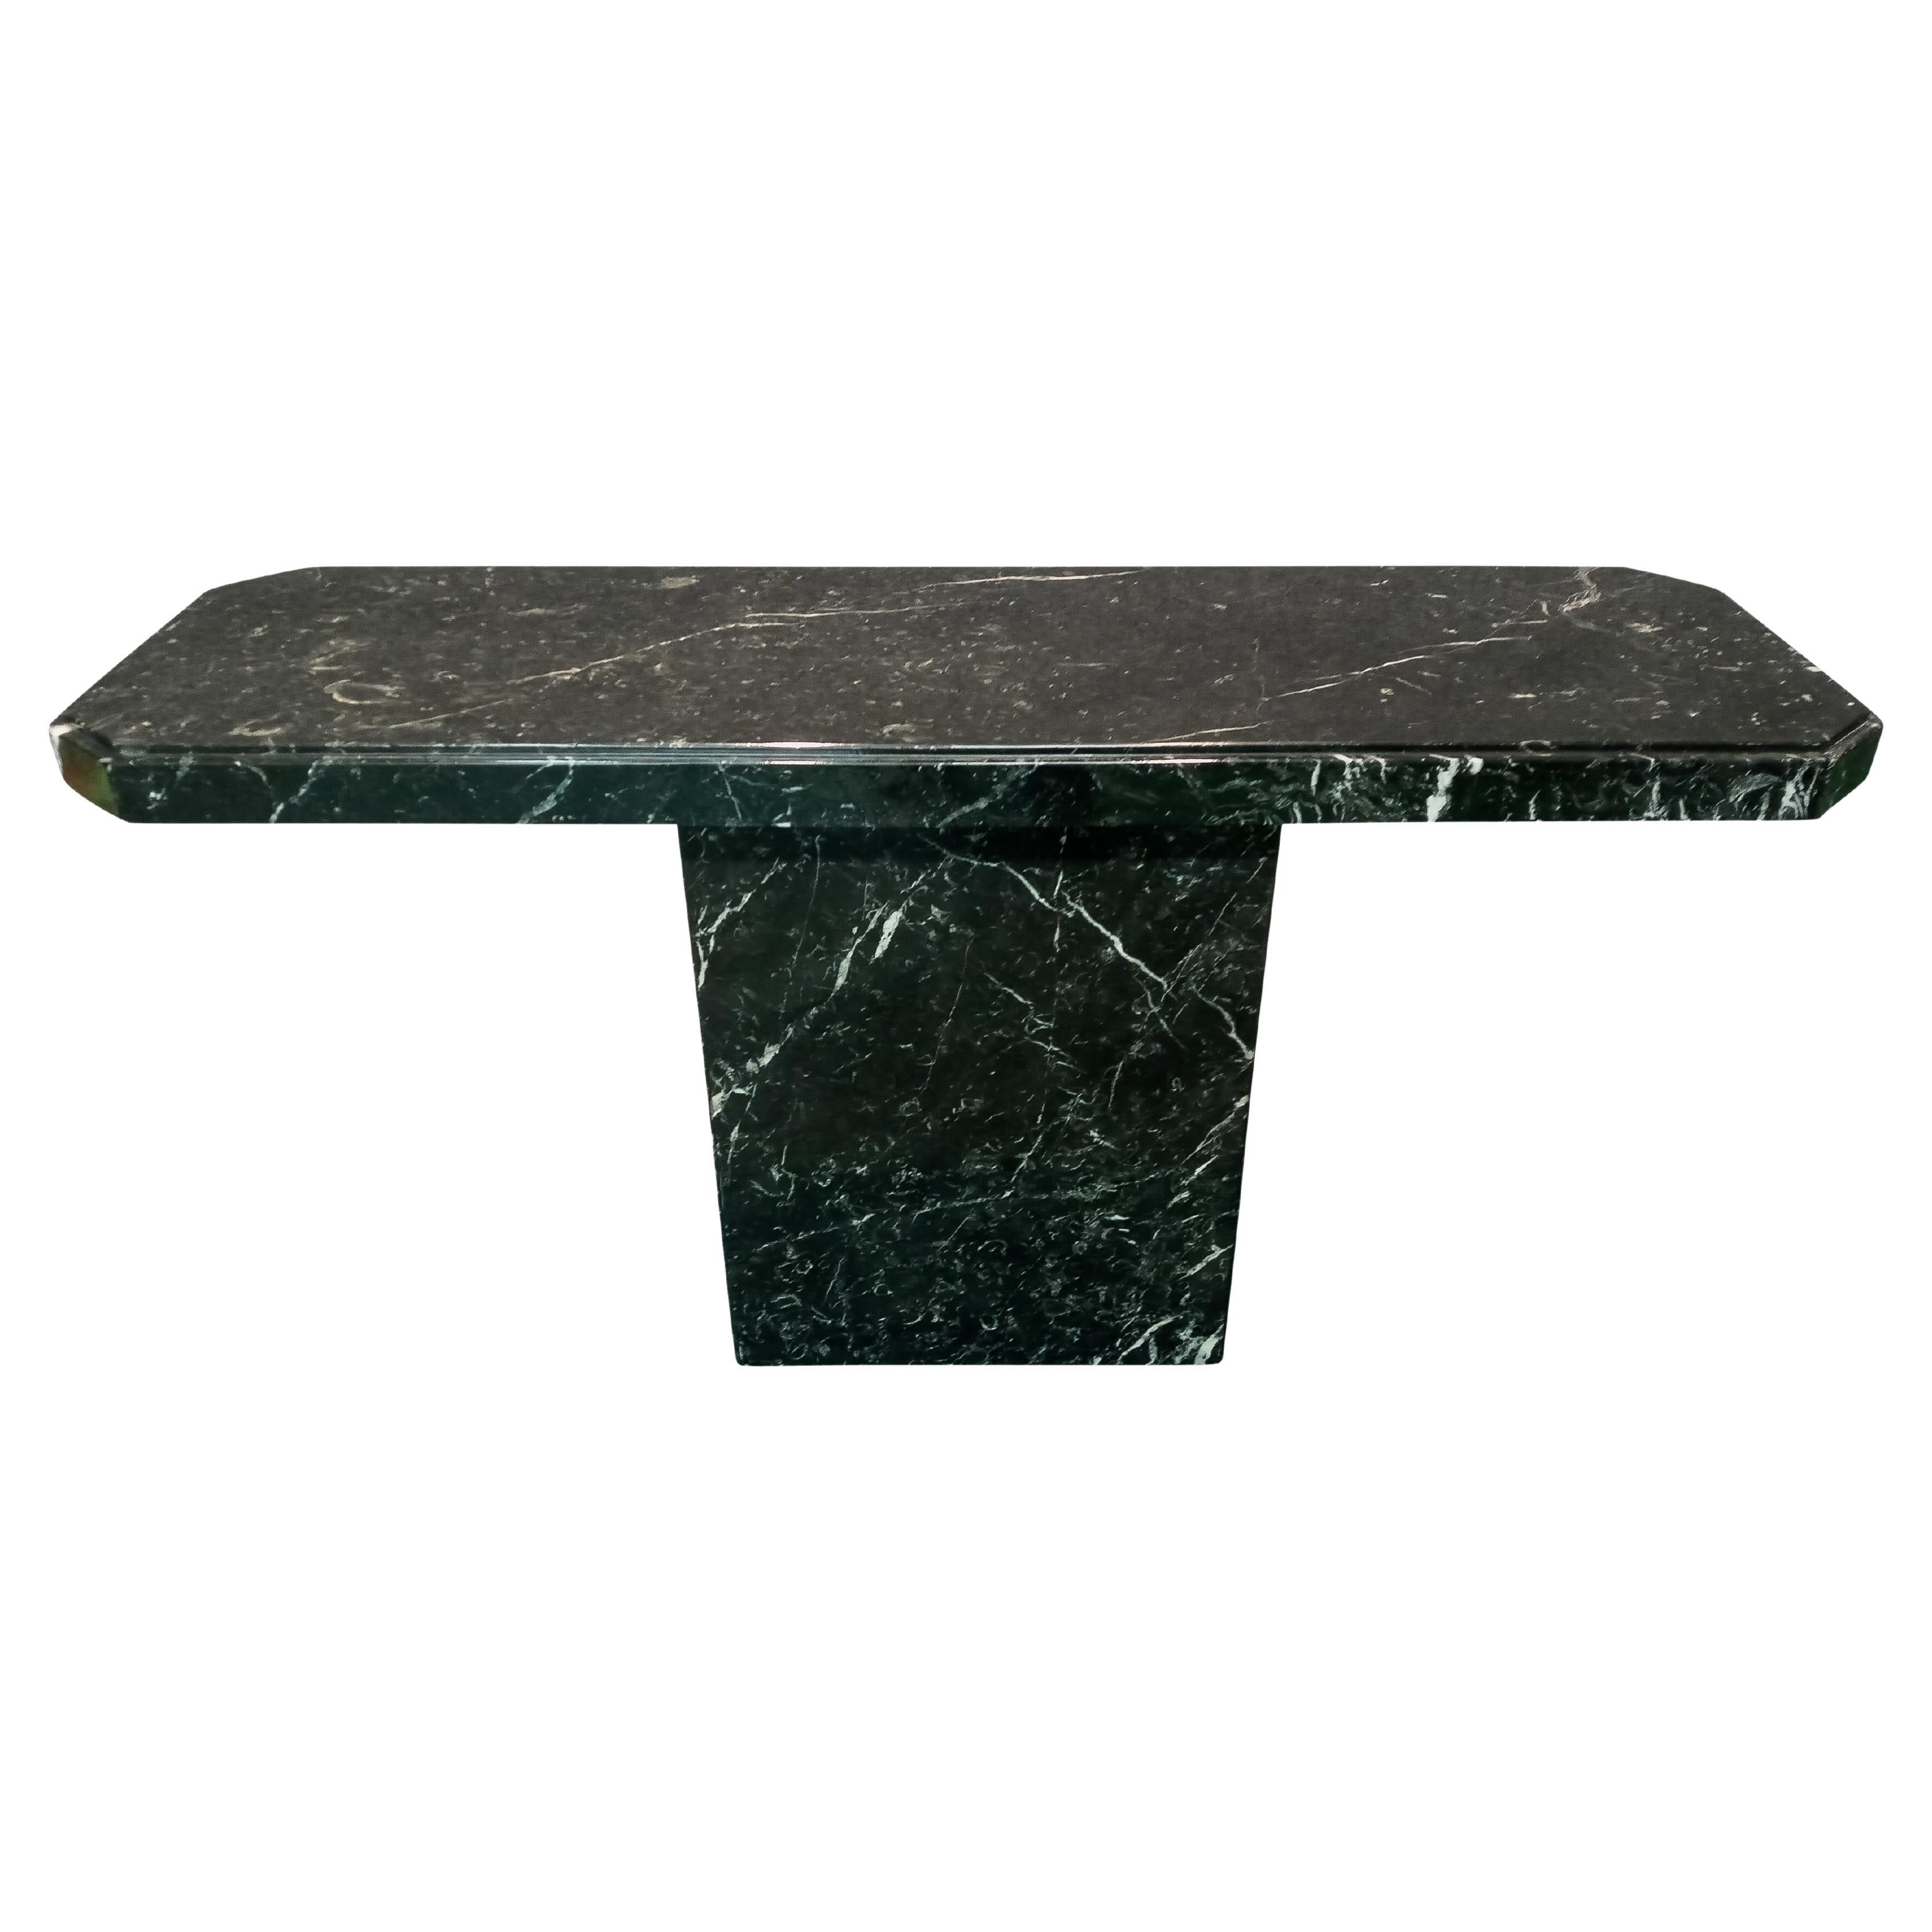 Italian Post-Modern Elegant Console Table by Ello in Exotic Nero Marquina Marble